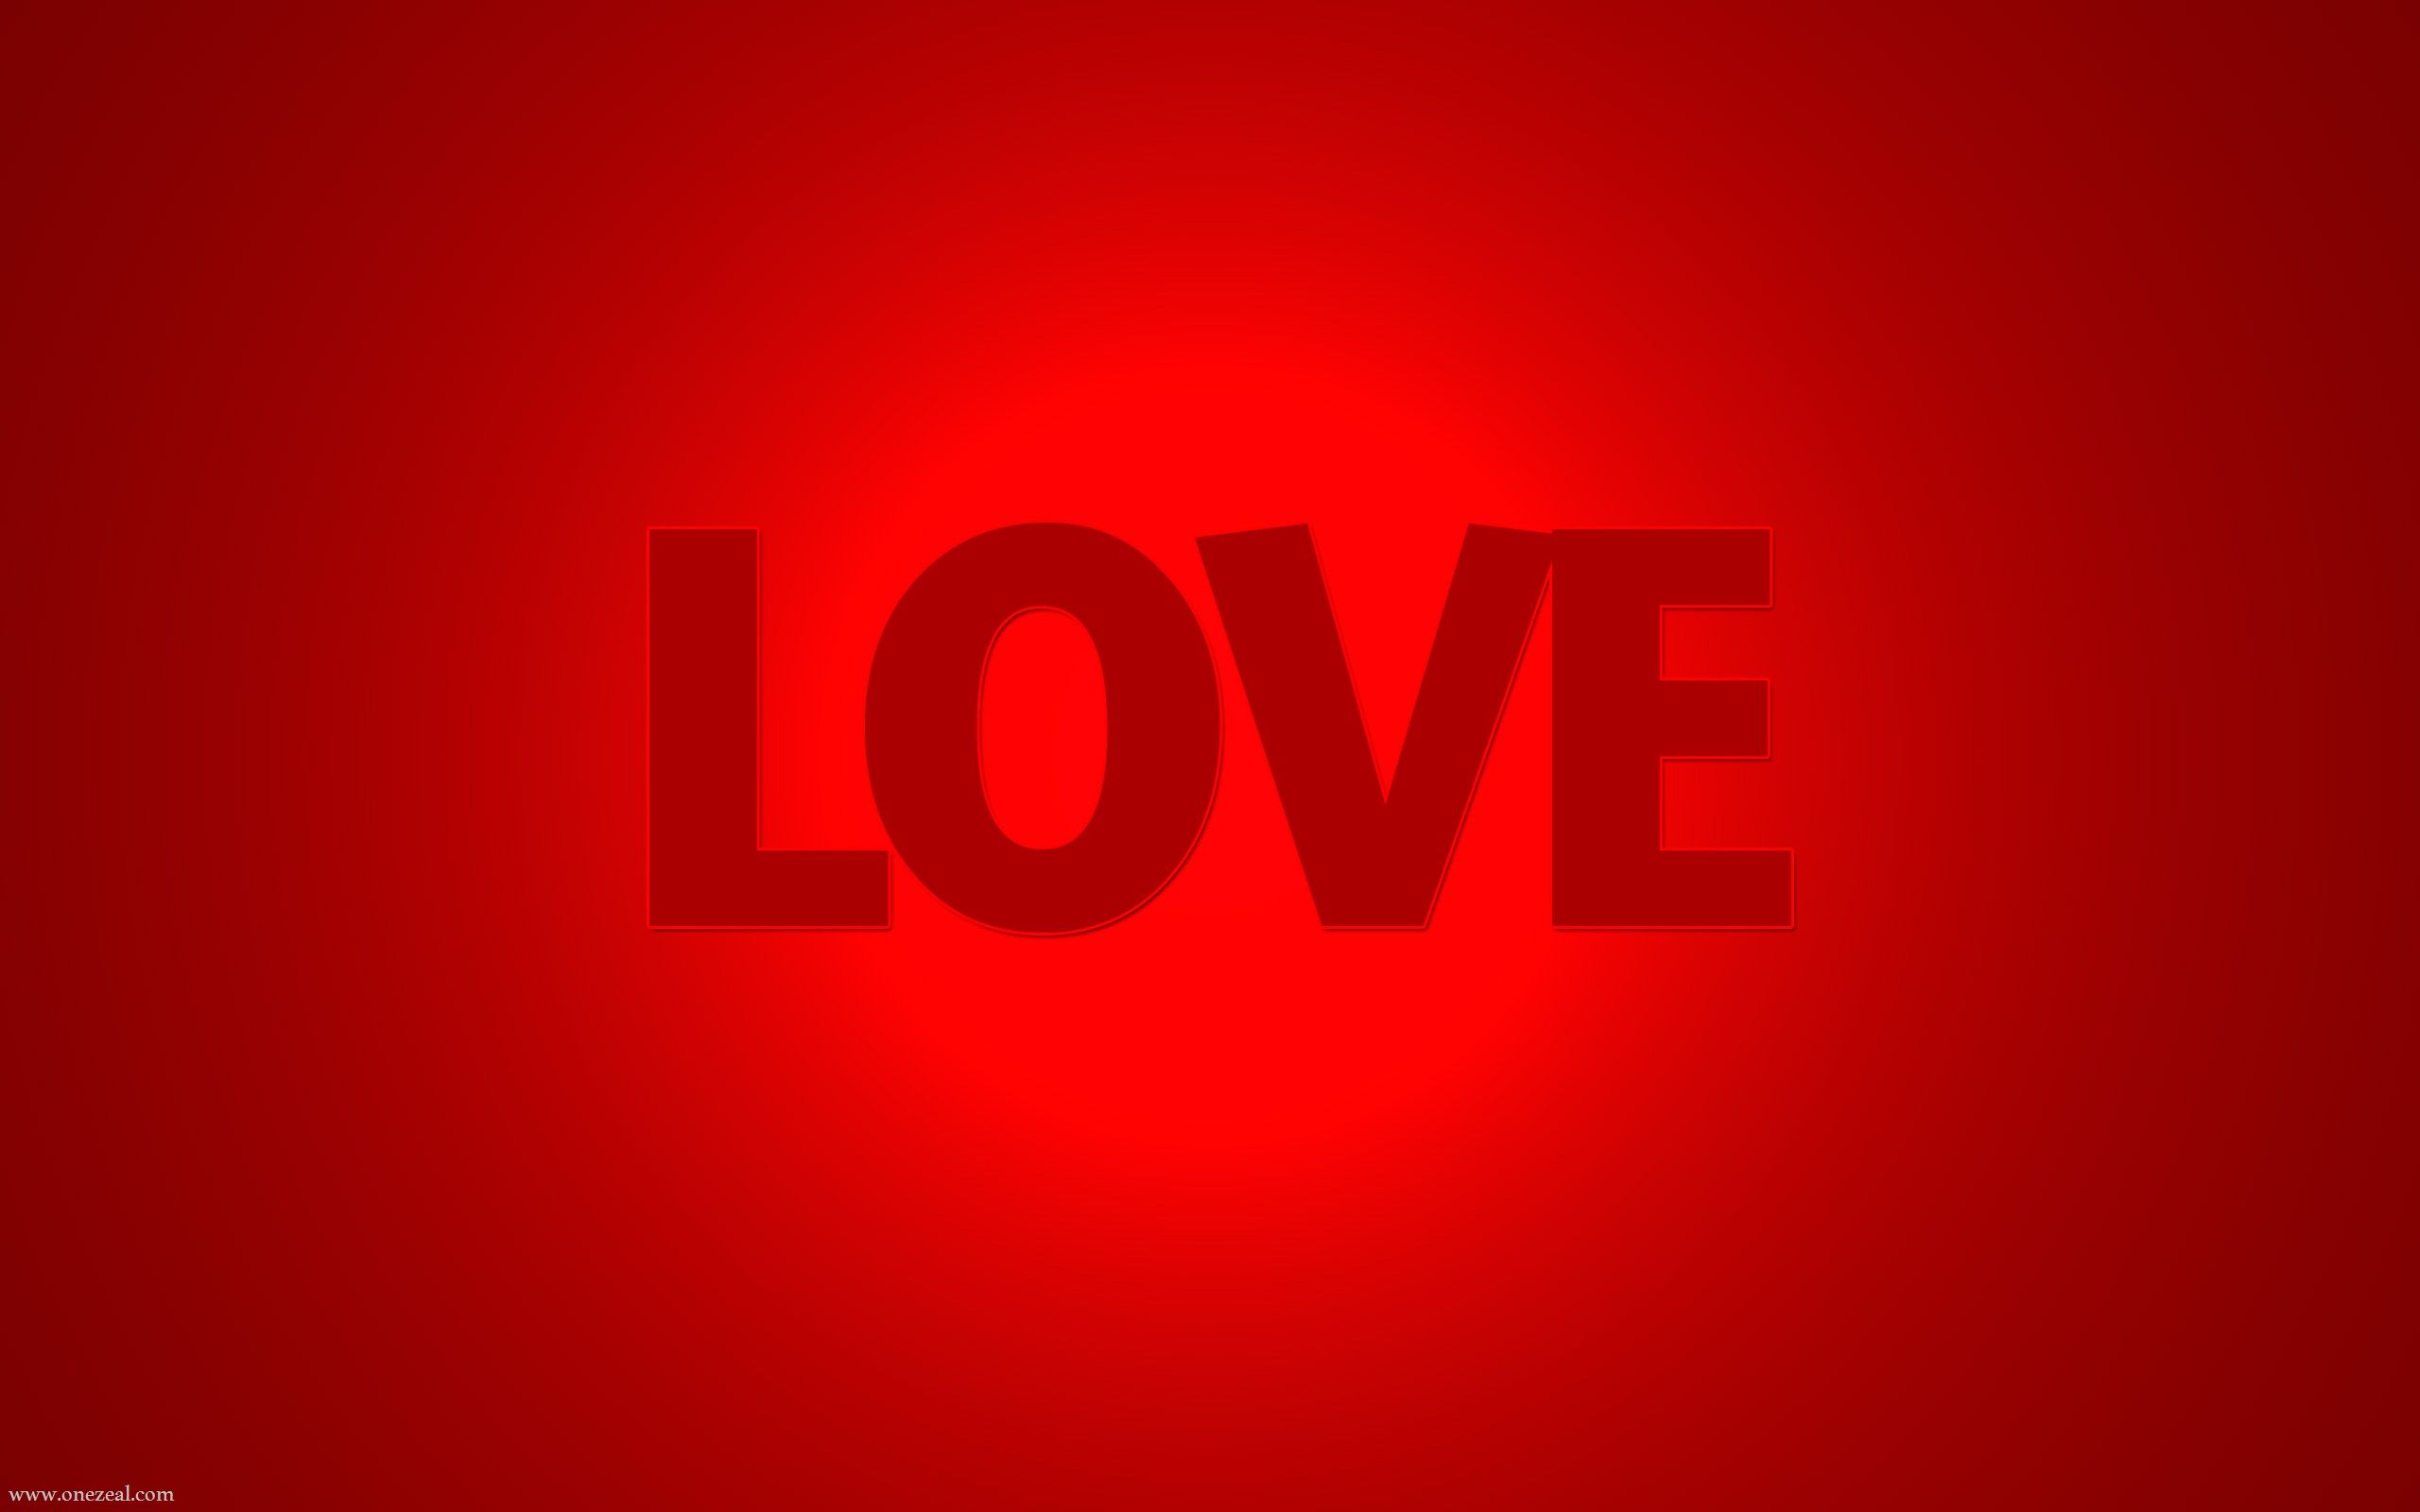 Love Word Red Colour Wallpaper Free Download. Cute love image, Love wallpaper download, Love wallpaper